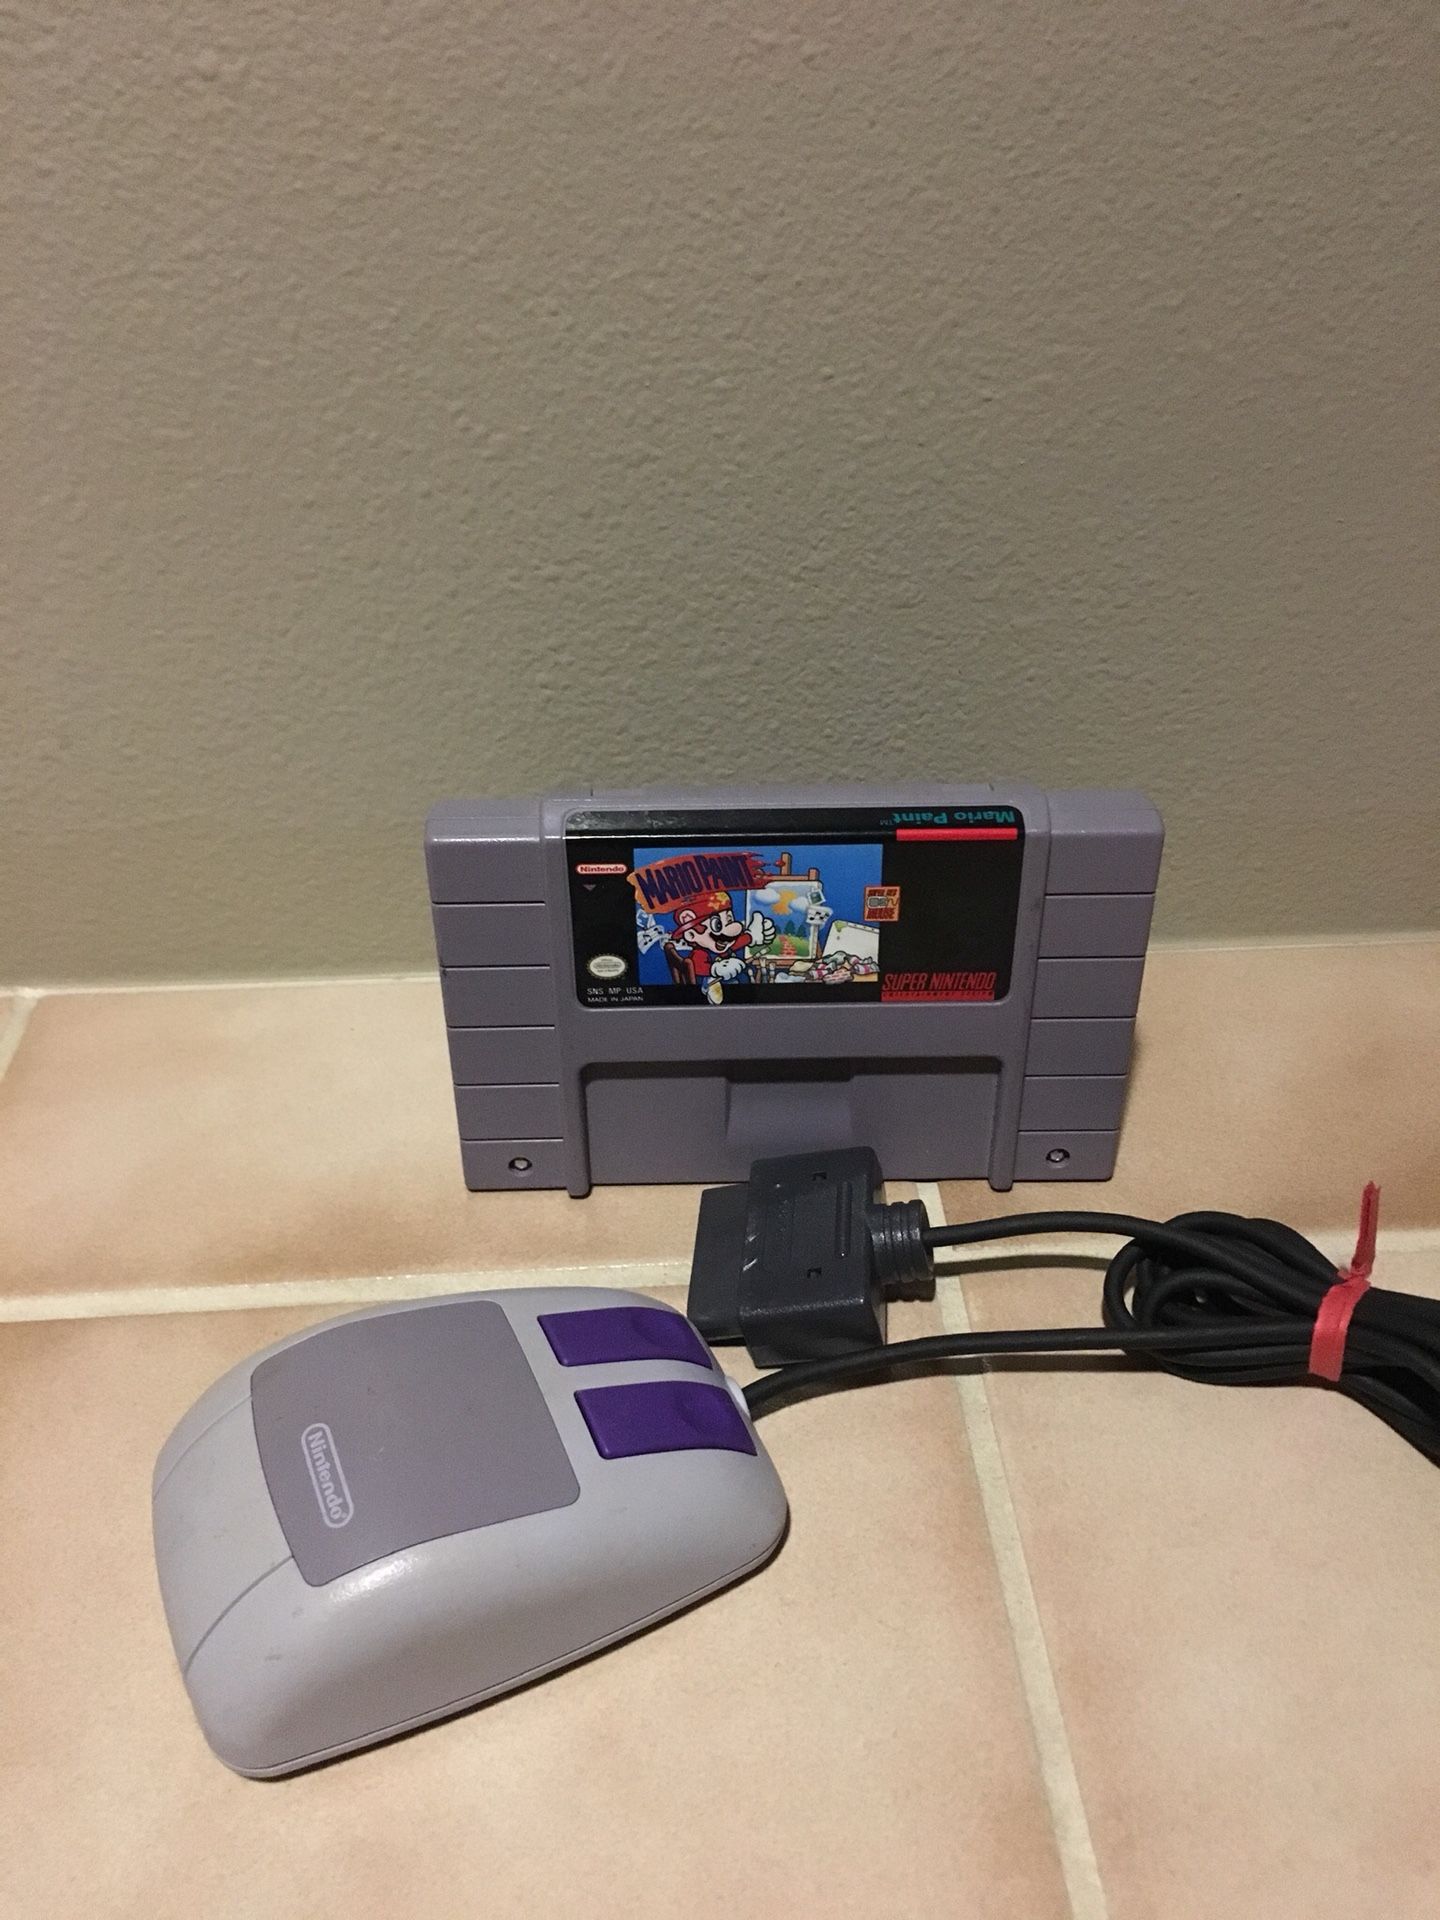 Mario paint and mouse for Super Nintendo